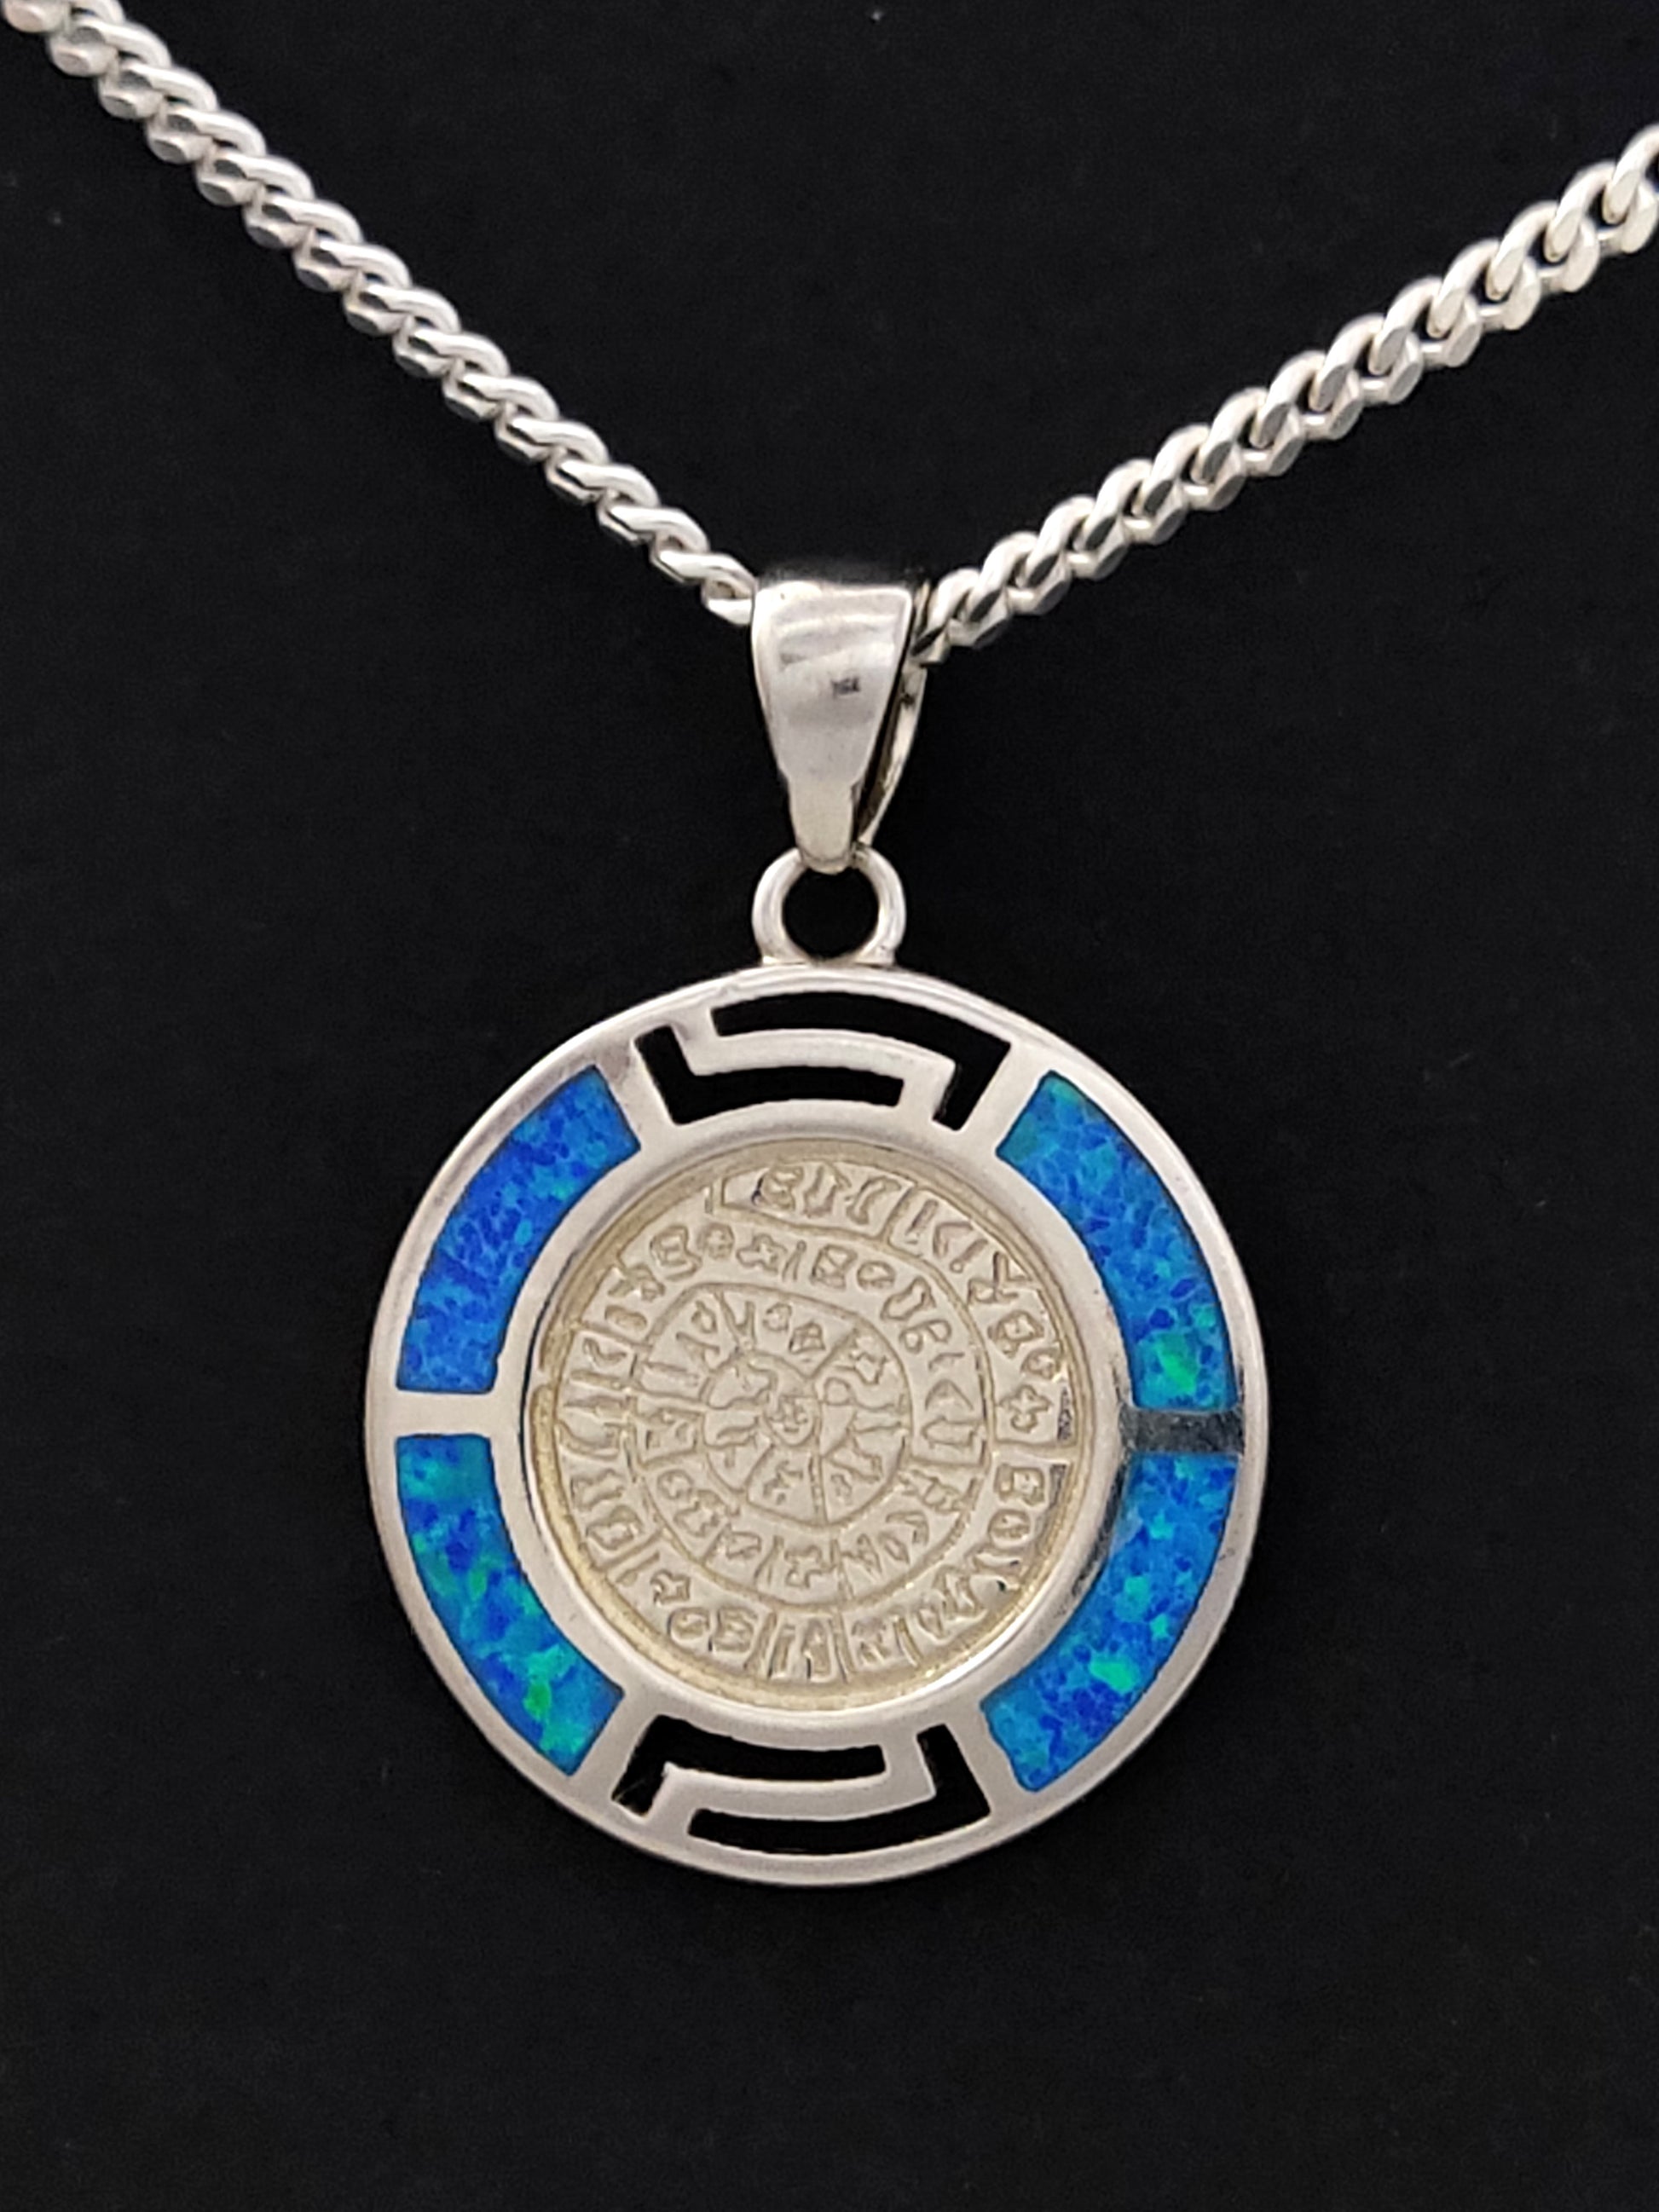 Phaistos Disc silver Greek pendant with blue opal stones measuring 19mm in width on a 2mm silver chain .